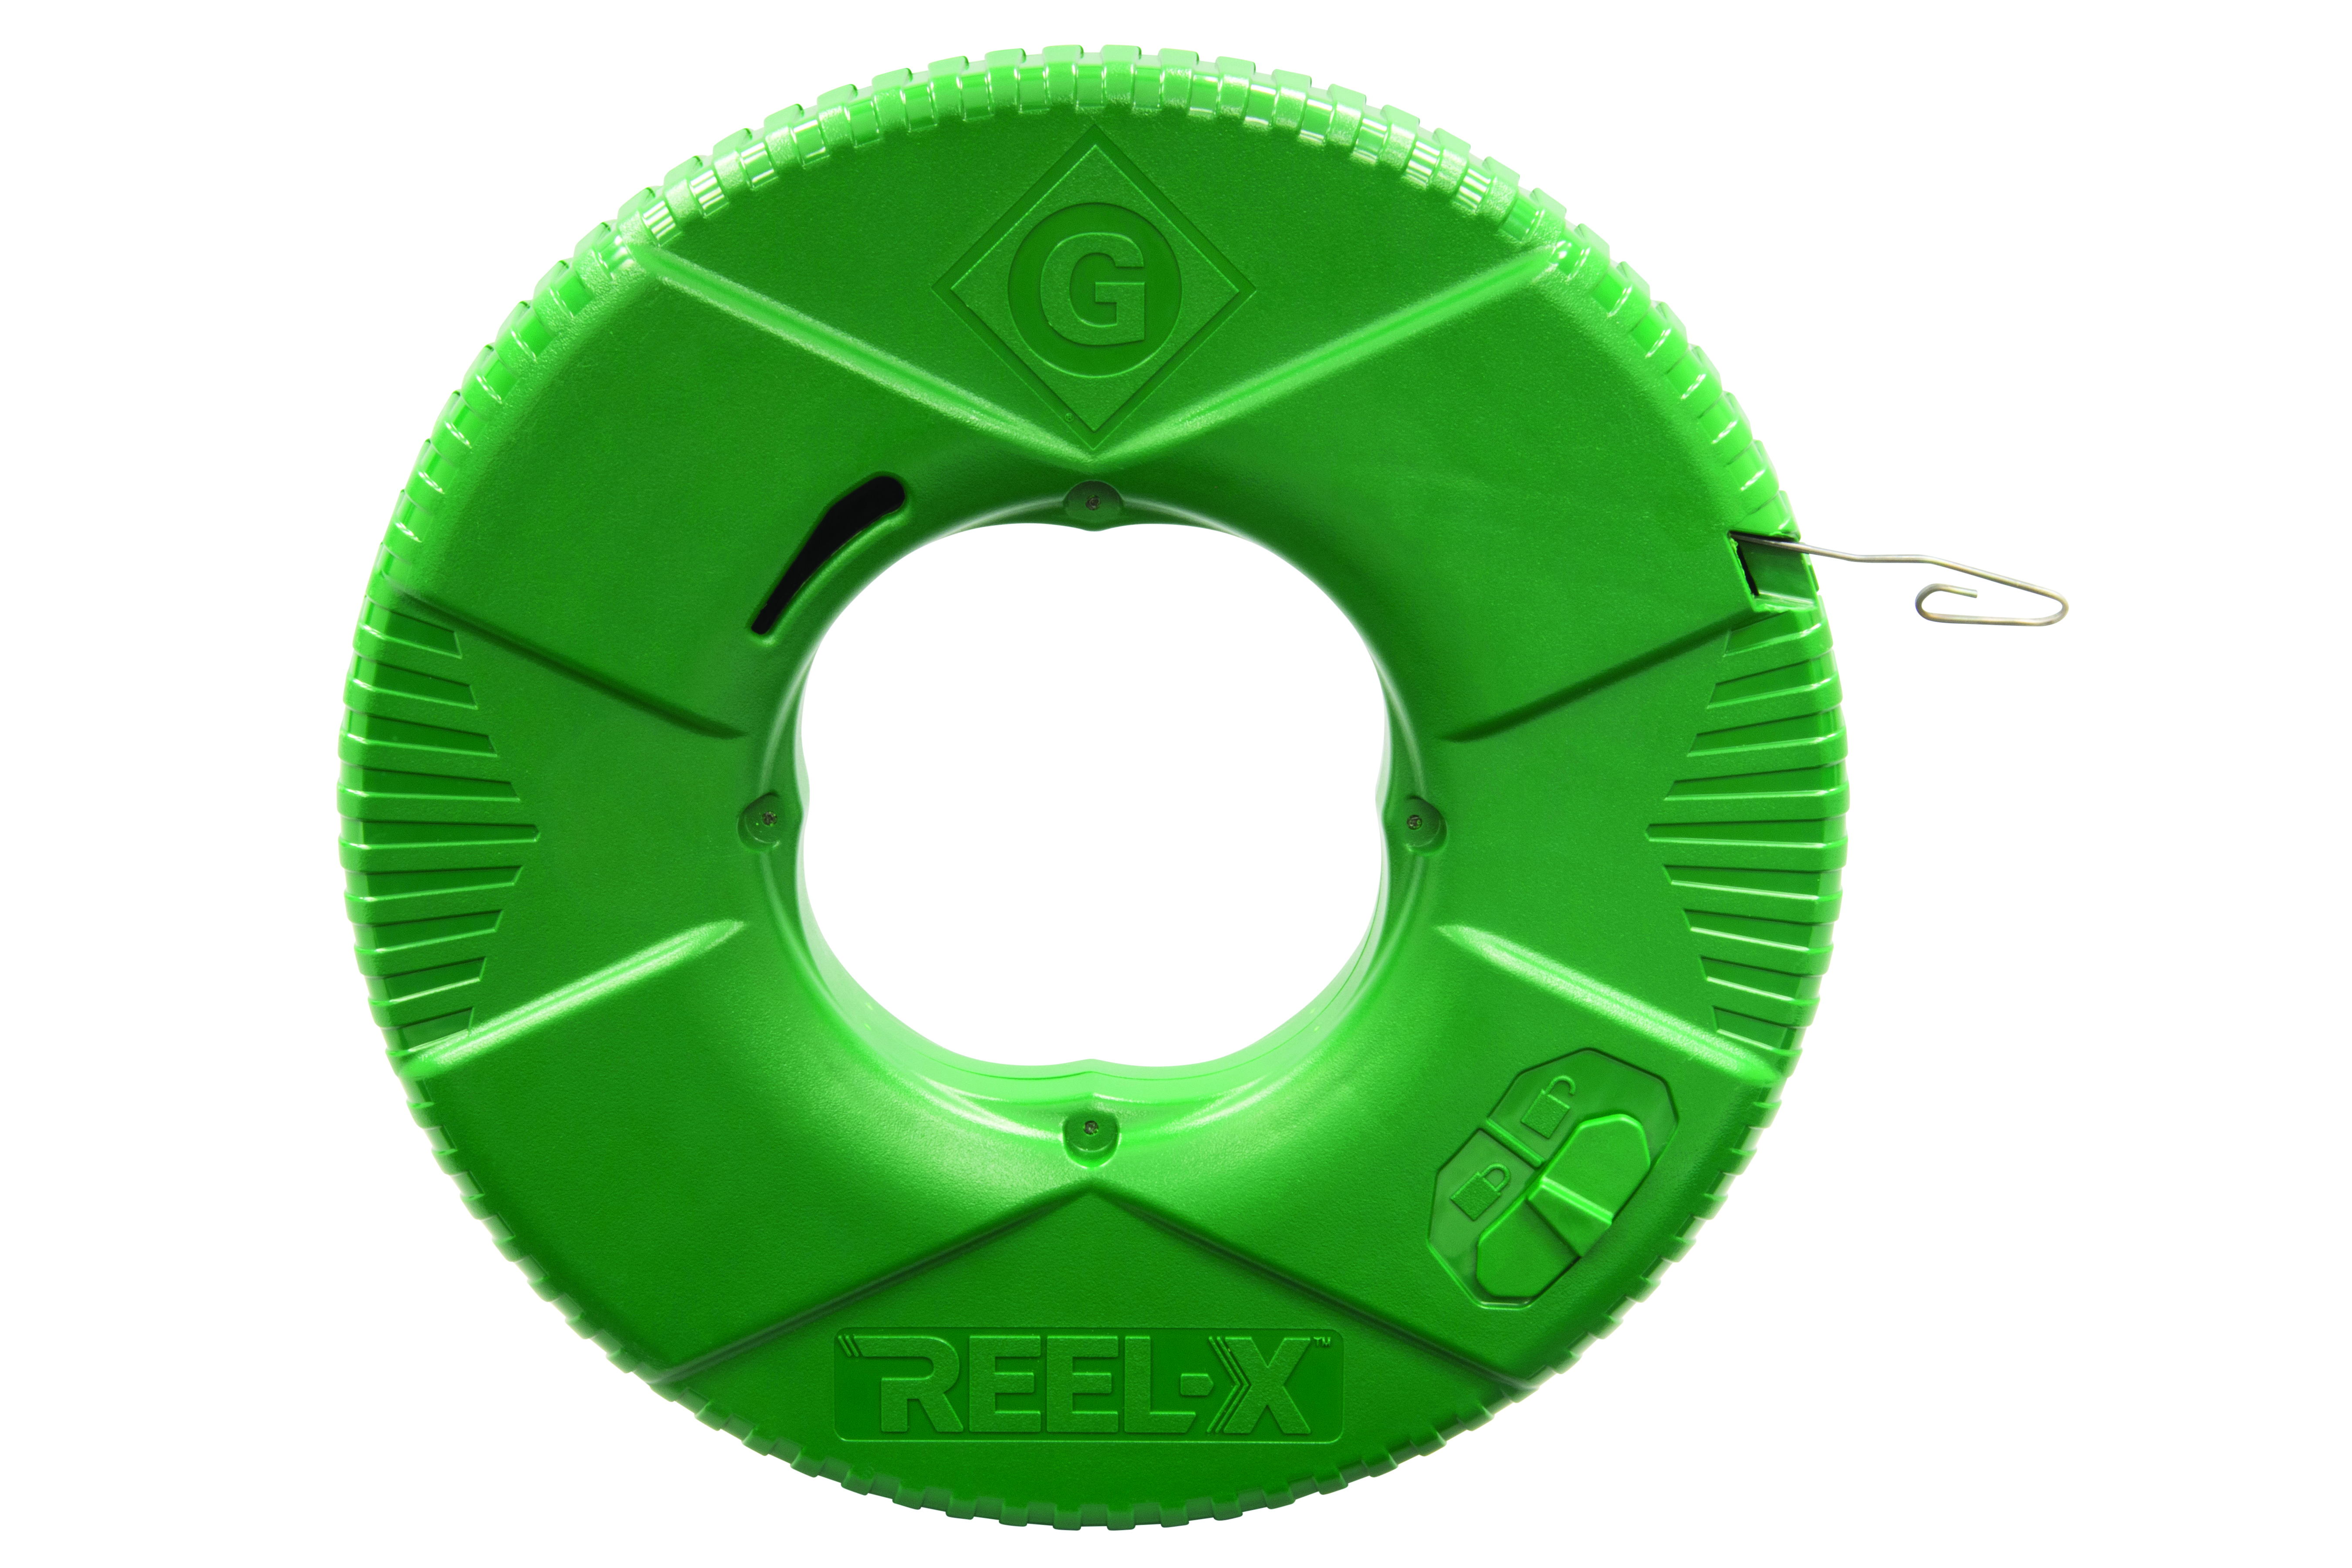 Green roll of fish tape. Image by Greenlee.